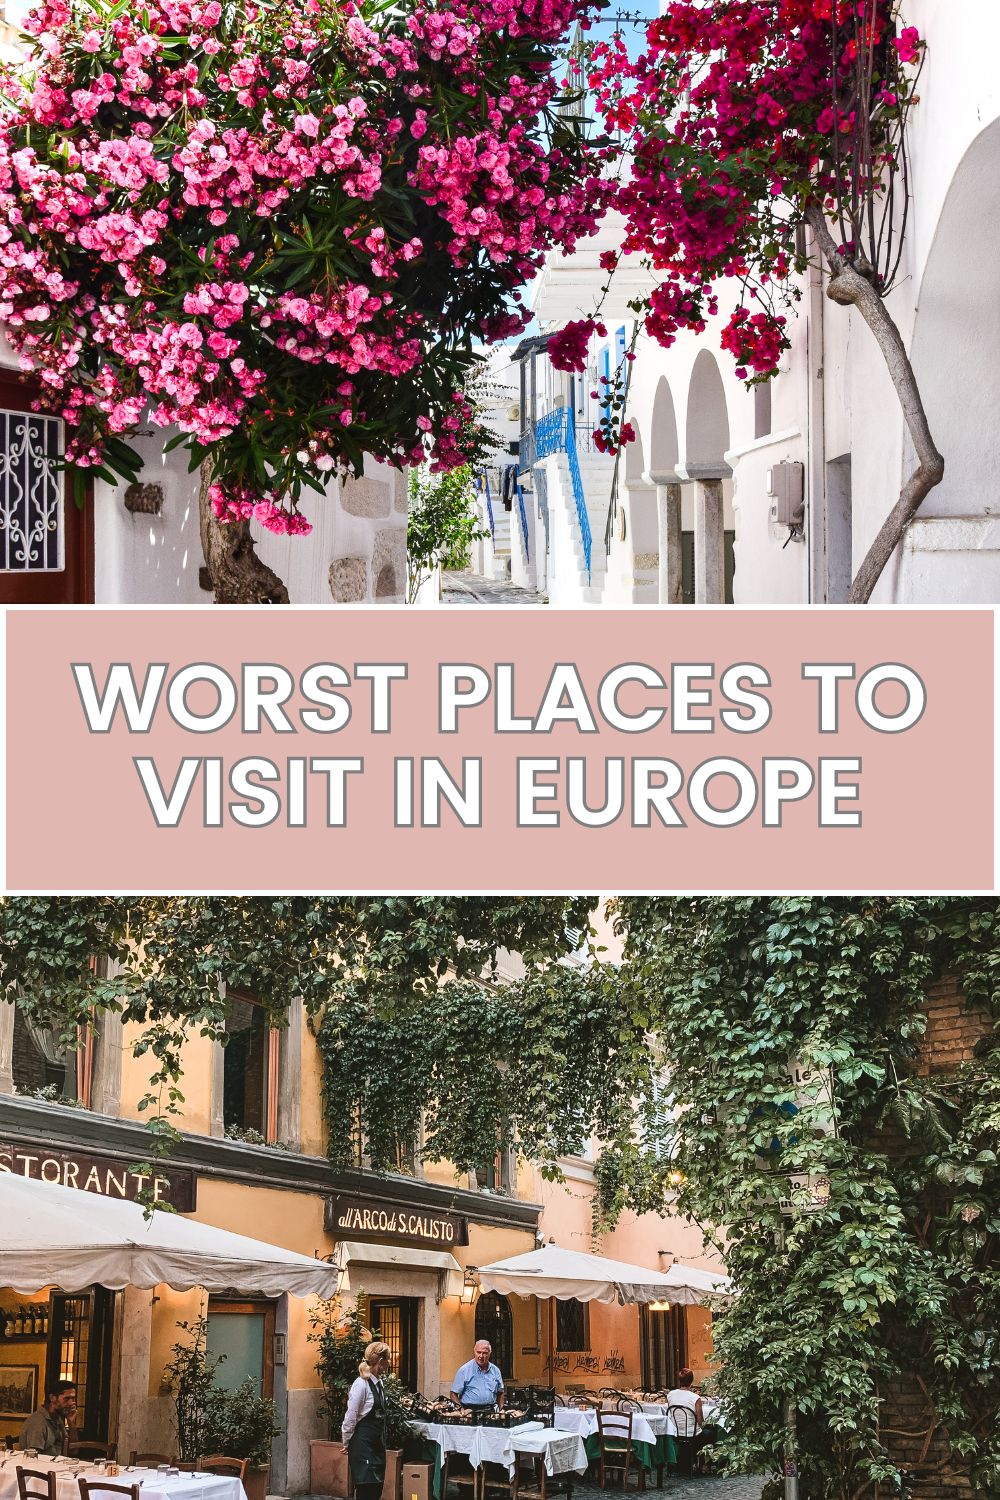 A travel-themed graphic with the title "WORST PLACES TO VISIT IN EUROPE." The background is split into two images: the top image shows a vibrant street with colorful flowers and white buildings, while the bottom image features an outdoor restaurant with tables set under leafy green trees.